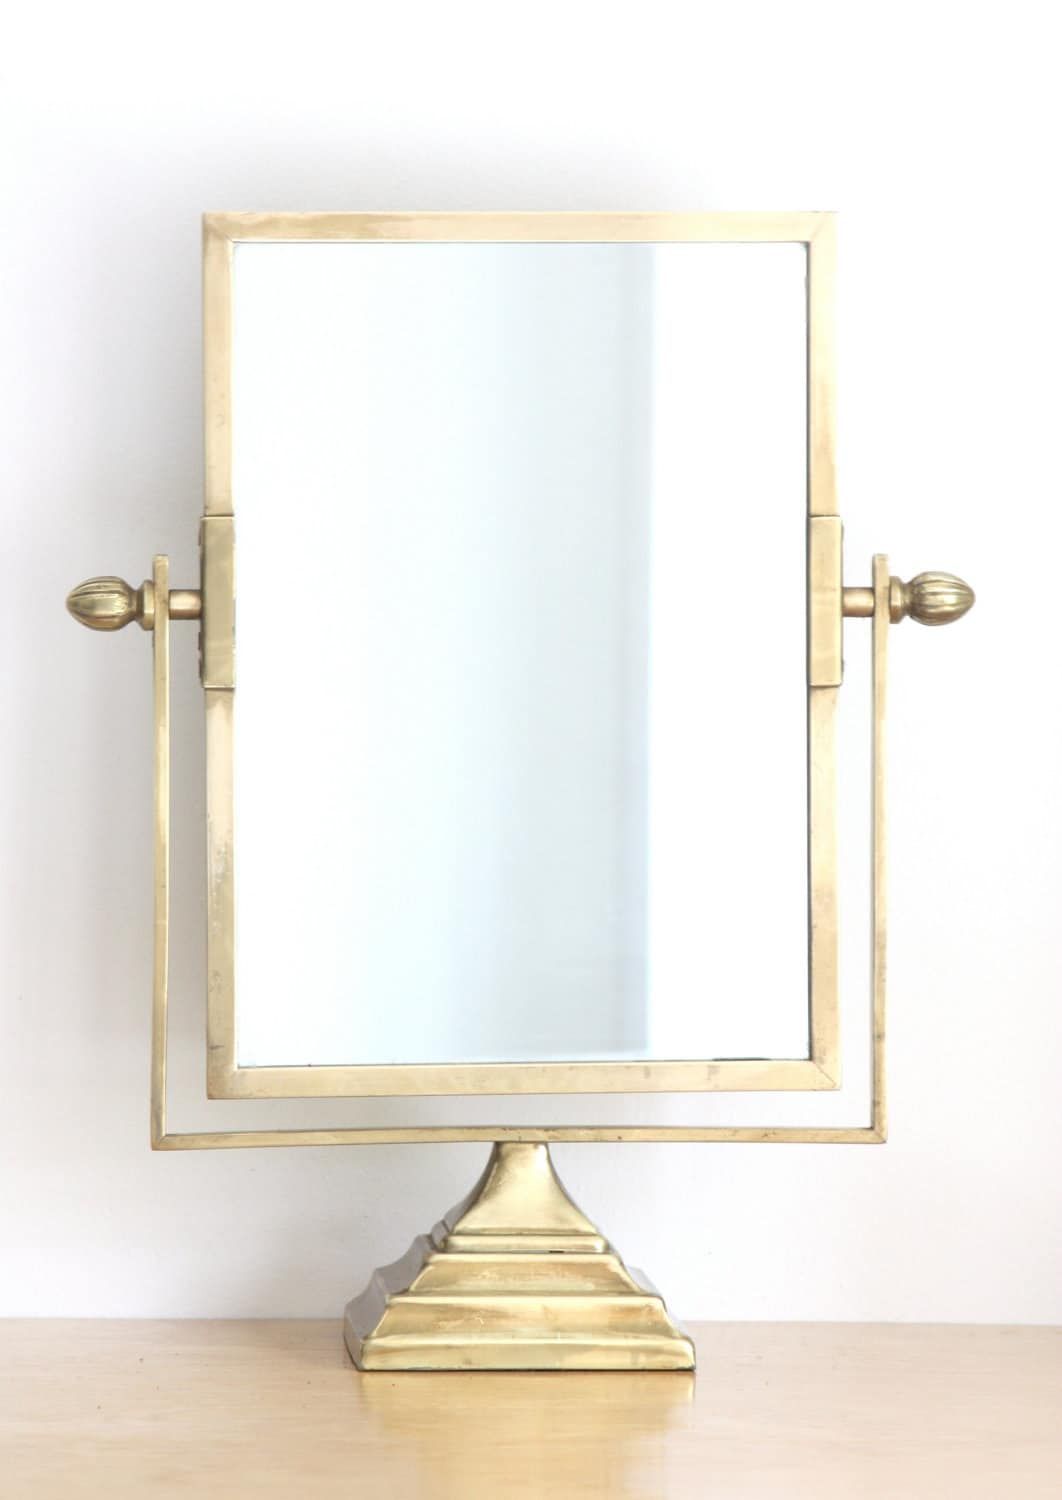 Large Antique Brass Pedestal Vanity Mirror Intended For Aged Silver Vanity Mirrors (View 3 of 15)